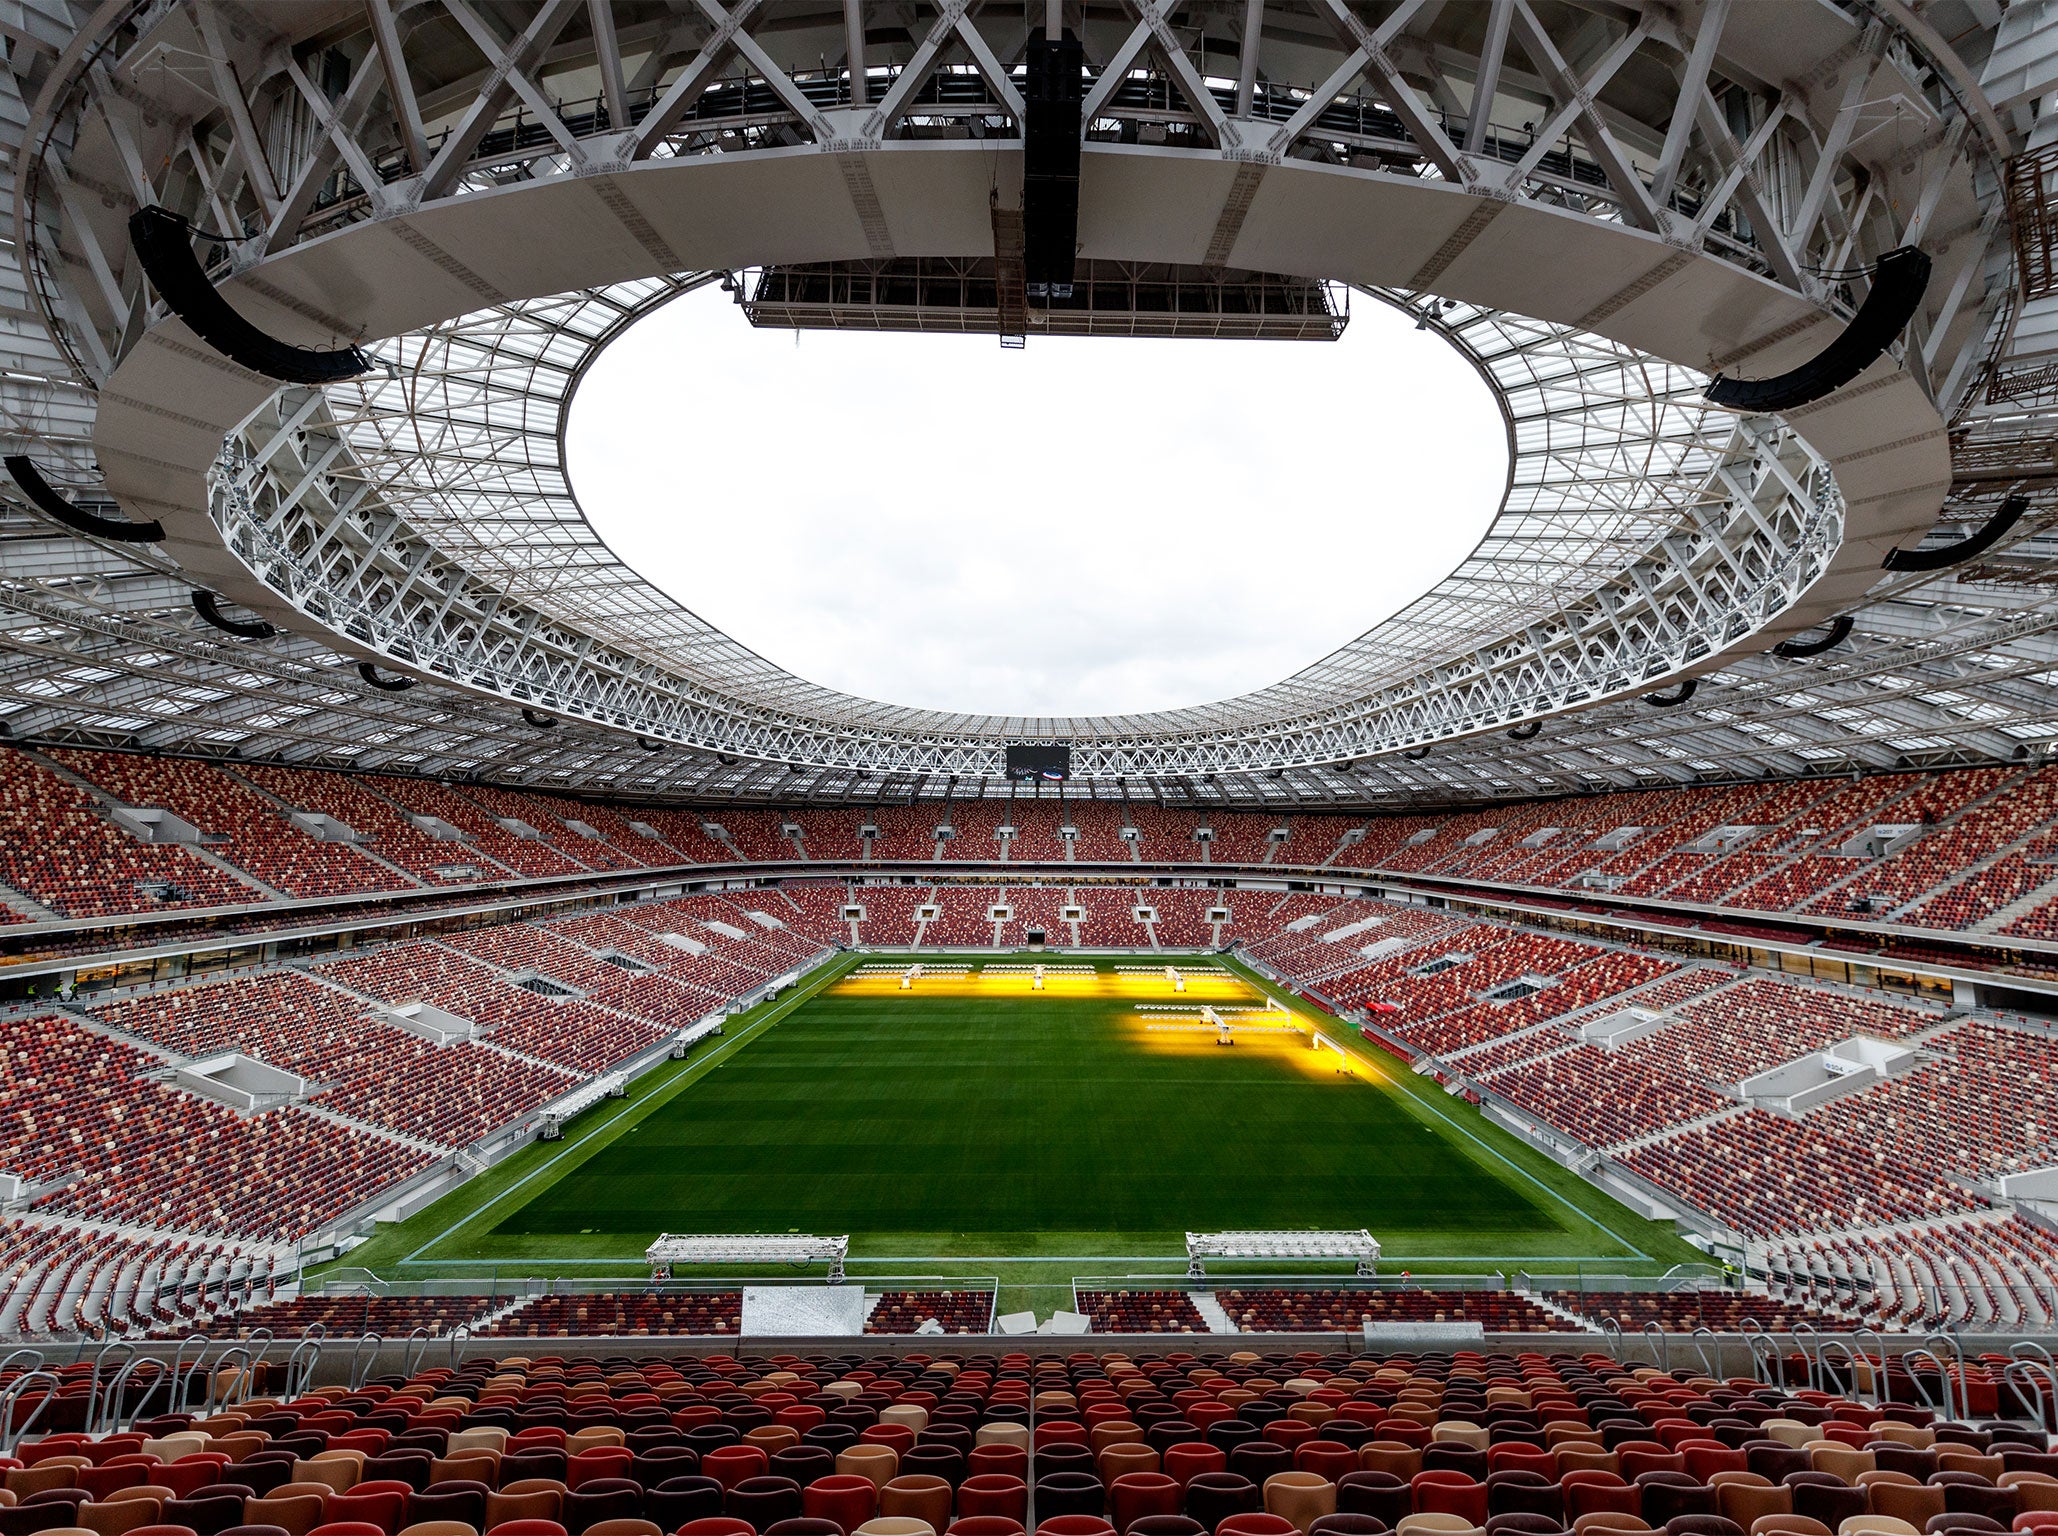 Russia open their World Cup campaign at the Luzhniki on June 14